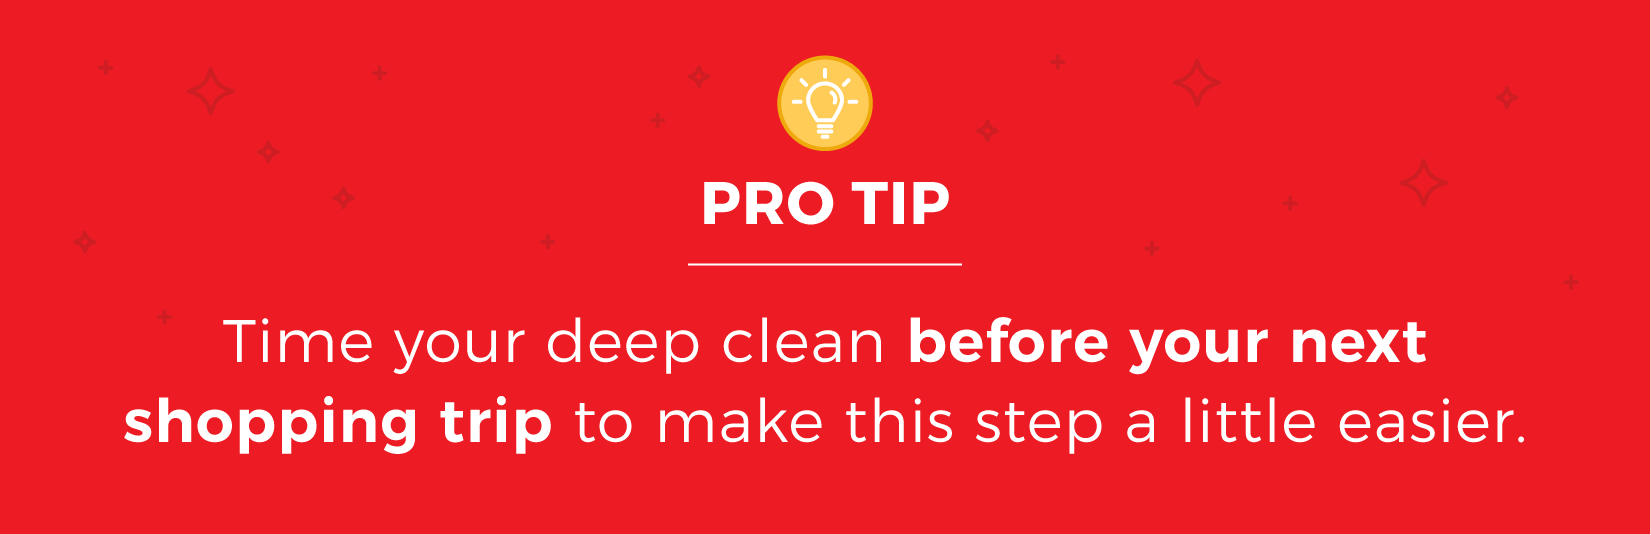 Image text reads: time your deep clean before your next shopping trip to make this step a little easier.